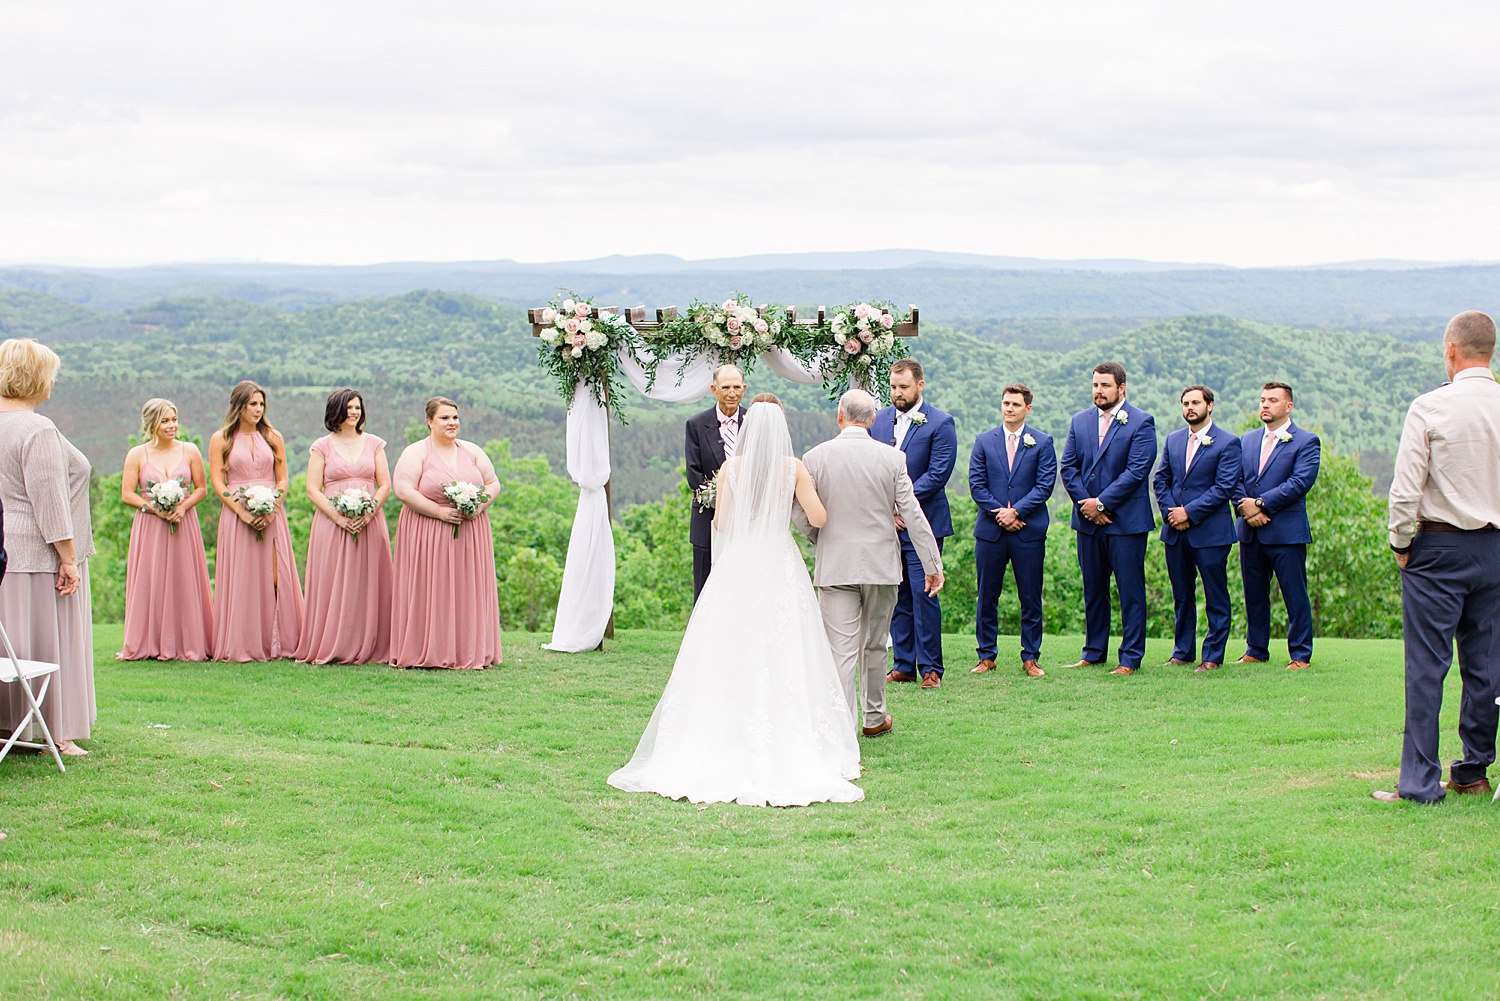 stunning outdoor wedding ceremony at Weddings at Cabin Bluff in AL